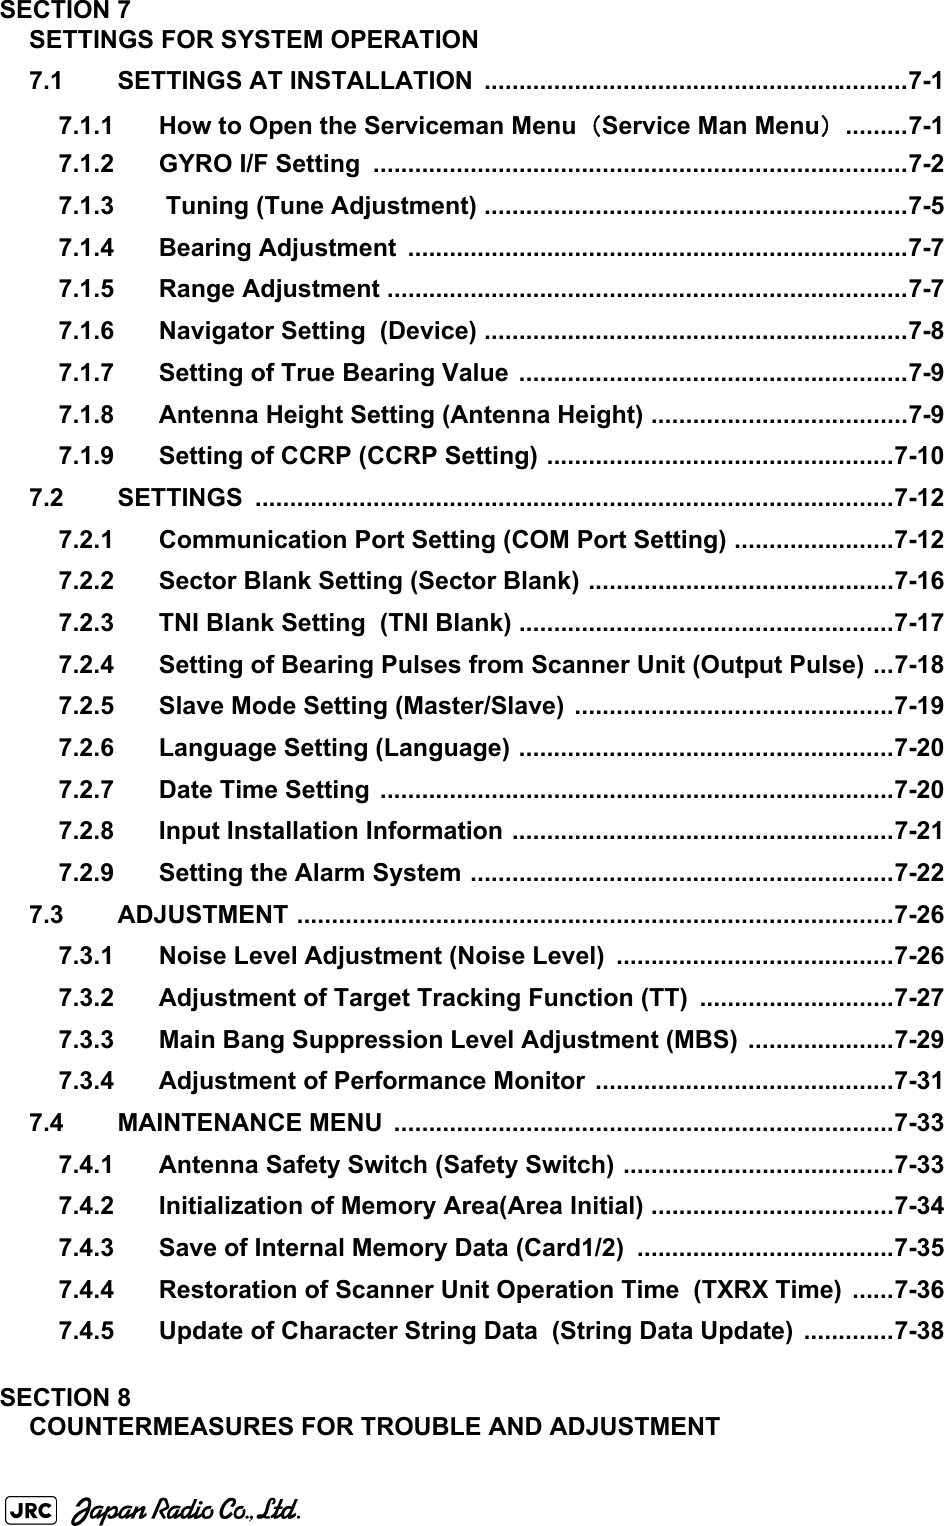 SECTION 7SETTINGS FOR SYSTEM OPERATION7.1 SETTINGS AT INSTALLATION  .............................................................7-17.1.1 How to Open the Serviceman Menu（Service Man Menu） .........7-17.1.2 GYRO I/F Setting  .............................................................................7-27.1.3  Tuning (Tune Adjustment) .............................................................7-57.1.4 Bearing Adjustment  ........................................................................7-77.1.5 Range Adjustment ...........................................................................7-77.1.6 Navigator Setting  (Device) .............................................................7-87.1.7 Setting of True Bearing Value ........................................................7-97.1.8 Antenna Height Setting (Antenna Height) .....................................7-97.1.9 Setting of CCRP (CCRP Setting) ..................................................7-107.2 SETTINGS ............................................................................................7-127.2.1 Communication Port Setting (COM Port Setting) .......................7-127.2.2 Sector Blank Setting (Sector Blank) ............................................7-167.2.3 TNI Blank Setting  (TNI Blank) ......................................................7-177.2.4 Setting of Bearing Pulses from Scanner Unit (Output Pulse) ...7-187.2.5 Slave Mode Setting (Master/Slave) ..............................................7-197.2.6 Language Setting (Language) ......................................................7-207.2.7 Date Time Setting  ..........................................................................7-207.2.8 Input Installation Information .......................................................7-217.2.9 Setting the Alarm System .............................................................7-227.3 ADJUSTMENT ......................................................................................7-267.3.1 Noise Level Adjustment (Noise Level)  ........................................7-267.3.2 Adjustment of Target Tracking Function (TT)  ............................7-277.3.3 Main Bang Suppression Level Adjustment (MBS)  .....................7-297.3.4 Adjustment of Performance Monitor  ...........................................7-317.4 MAINTENANCE MENU  ........................................................................7-337.4.1 Antenna Safety Switch (Safety Switch) .......................................7-337.4.2 Initialization of Memory Area(Area Initial) ...................................7-347.4.3 Save of Internal Memory Data (Card1/2)  .....................................7-357.4.4 Restoration of Scanner Unit Operation Time  (TXRX Time)  ......7-367.4.5 Update of Character String Data  (String Data Update) .............7-38SECTION 8COUNTERMEASURES FOR TROUBLE AND ADJUSTMENT